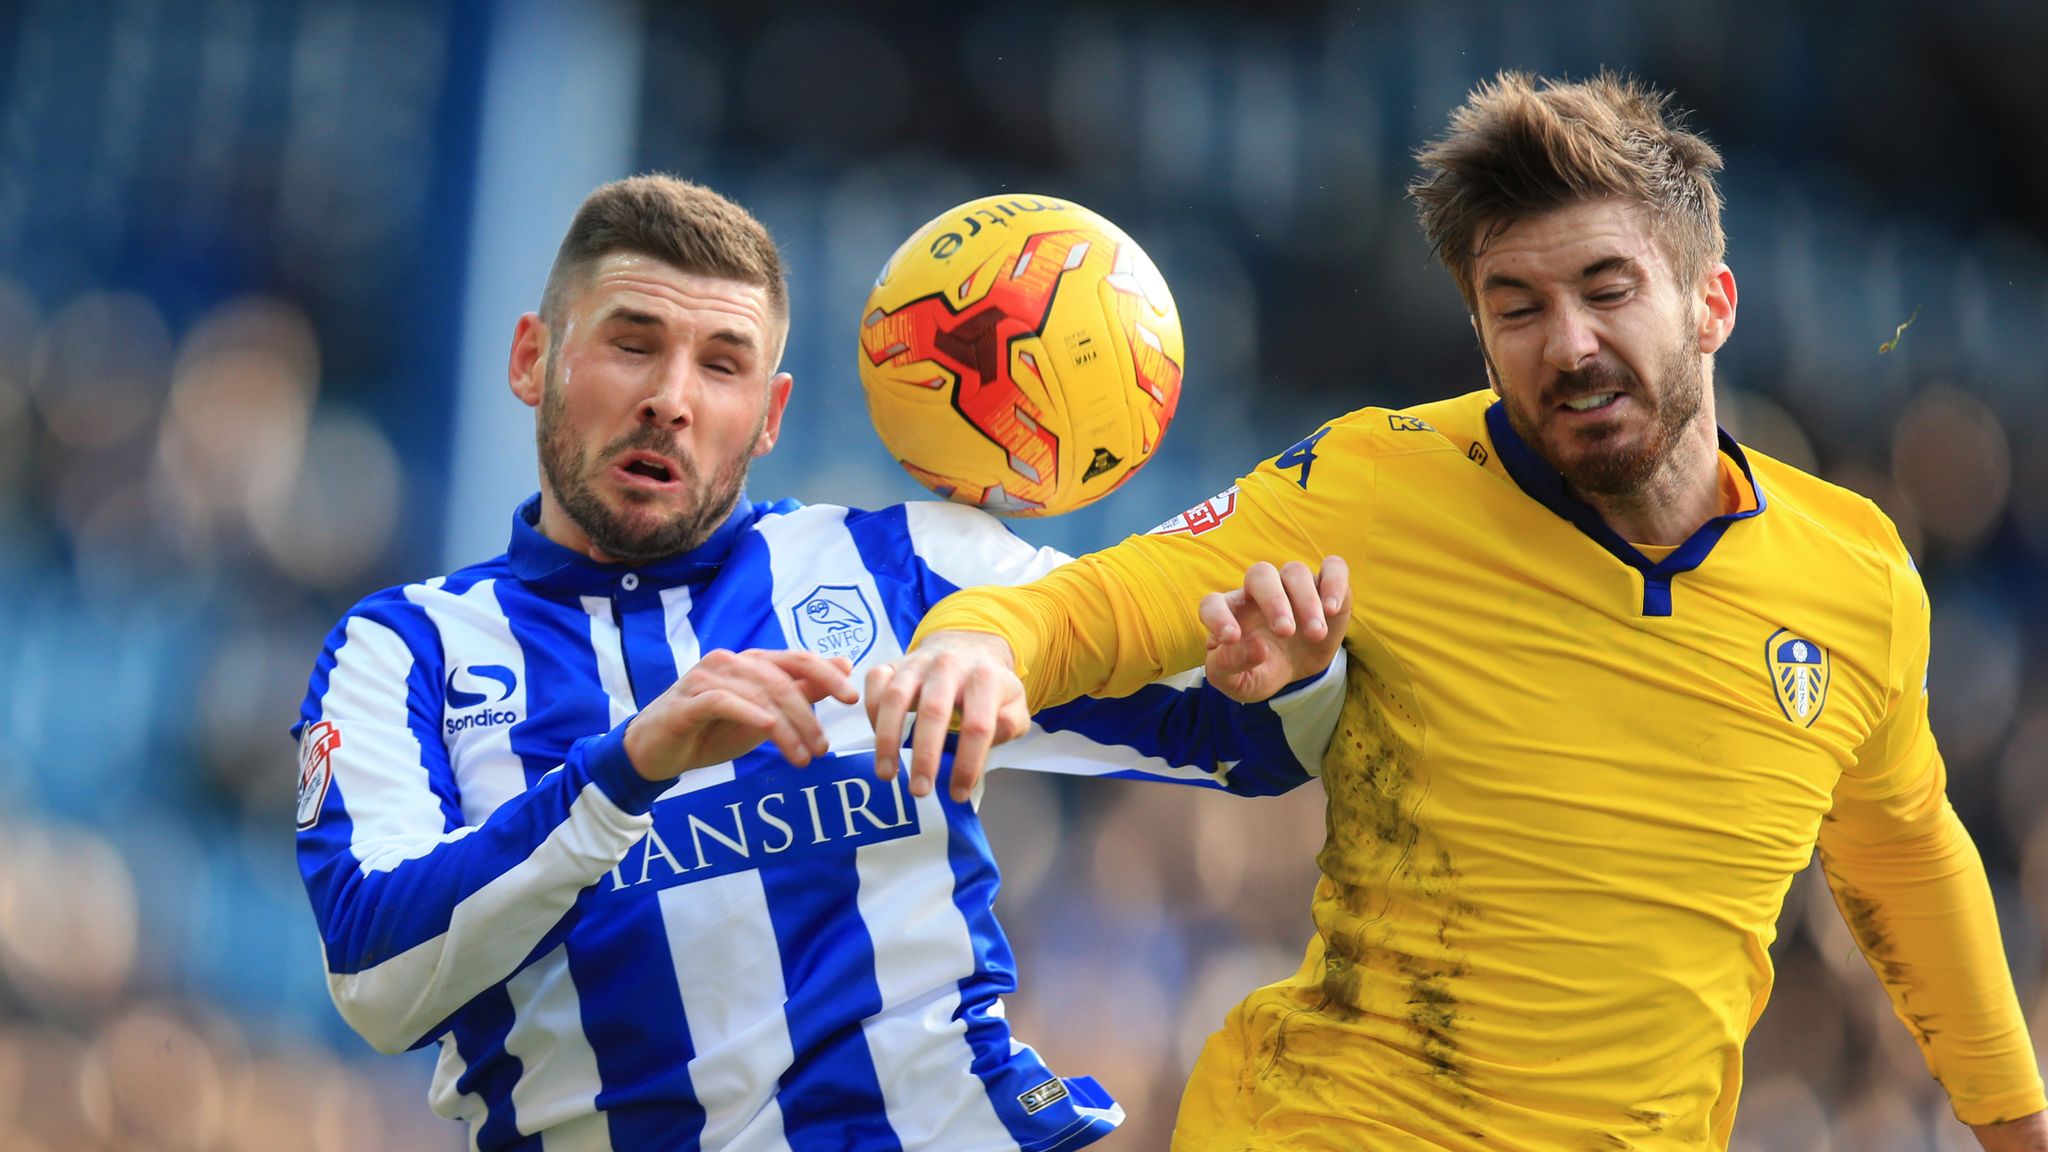 What is former Sheffield Wednesday man Gary Hooper up to these